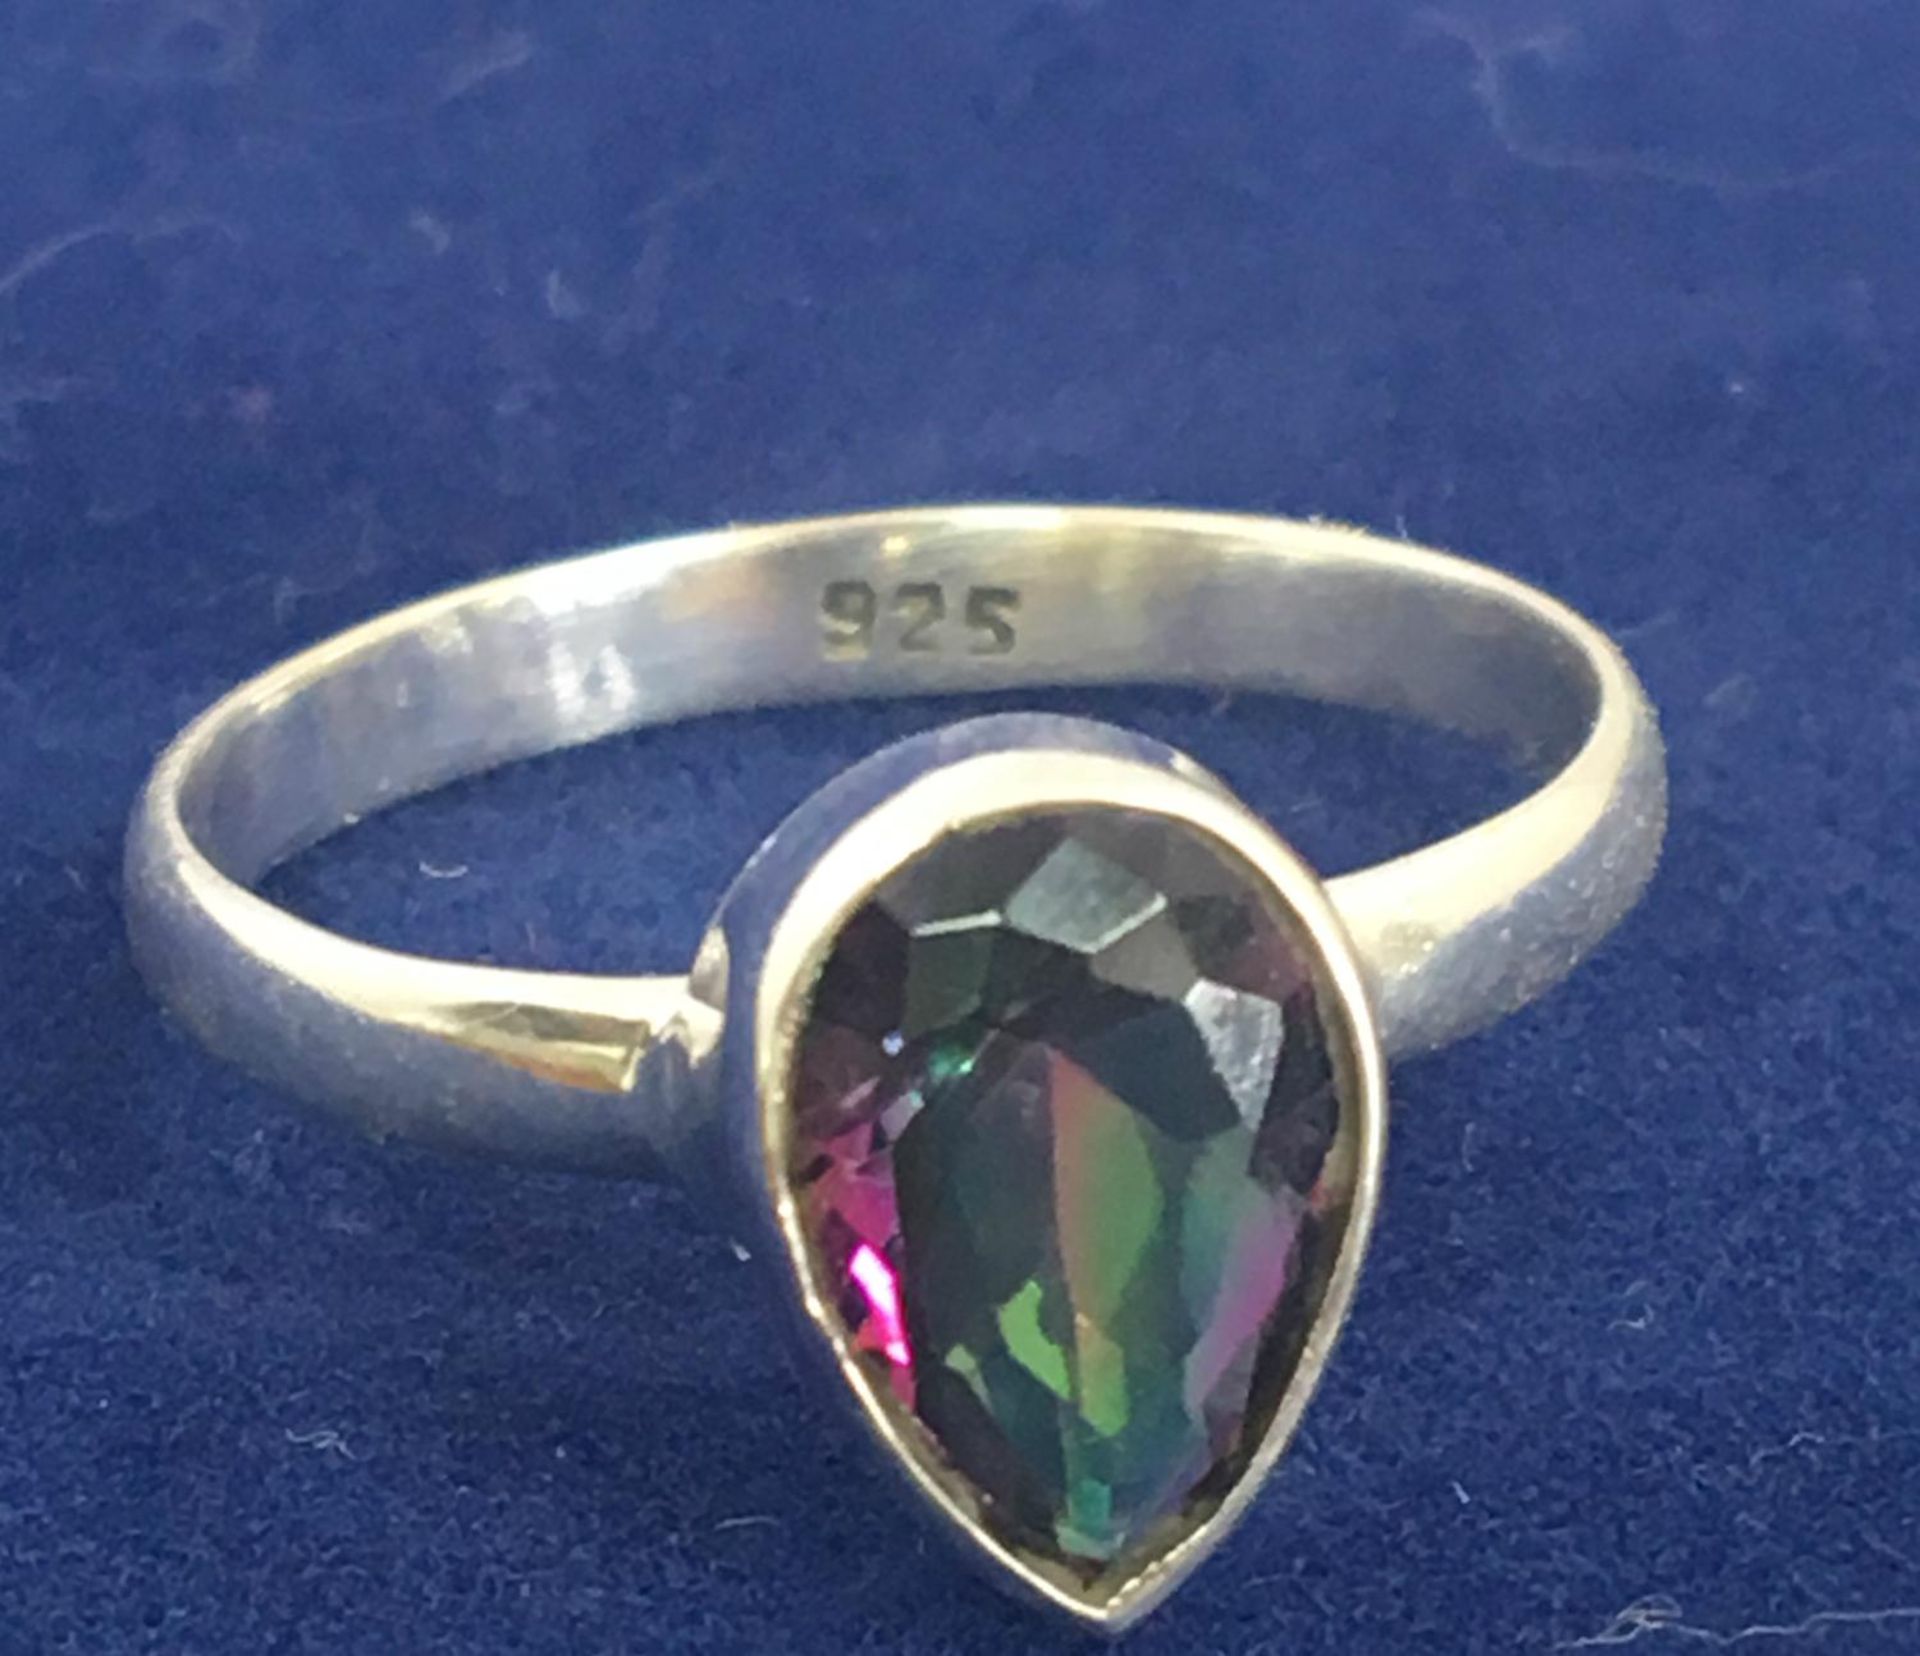 A stunning 10mm pear cut mystic topaz solitaire stone set in 925 silver - SIZE R